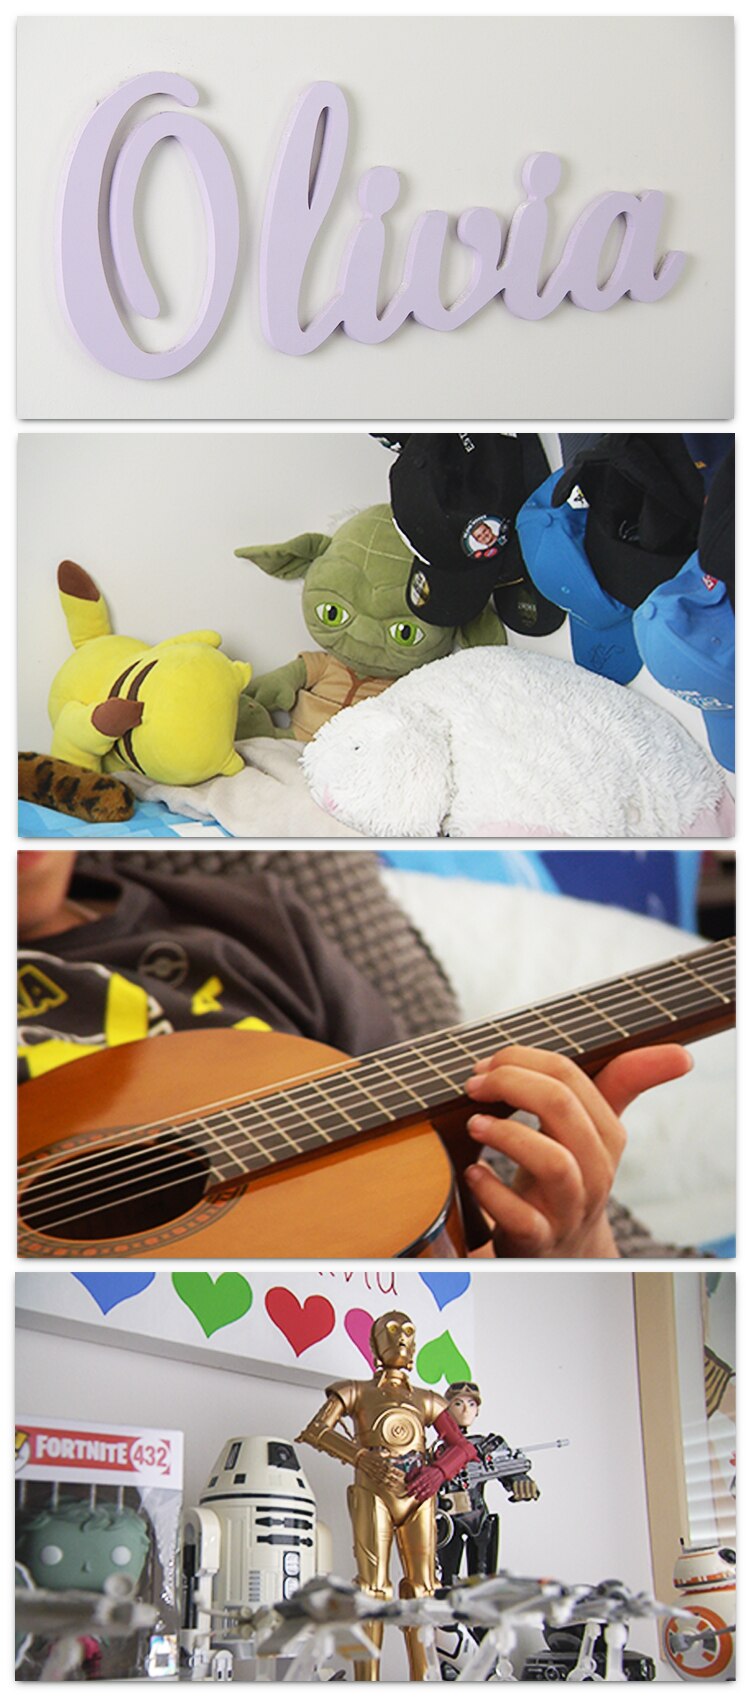 Photos from inside Olivia Purdie's room including starwars toys and playing the guitar.